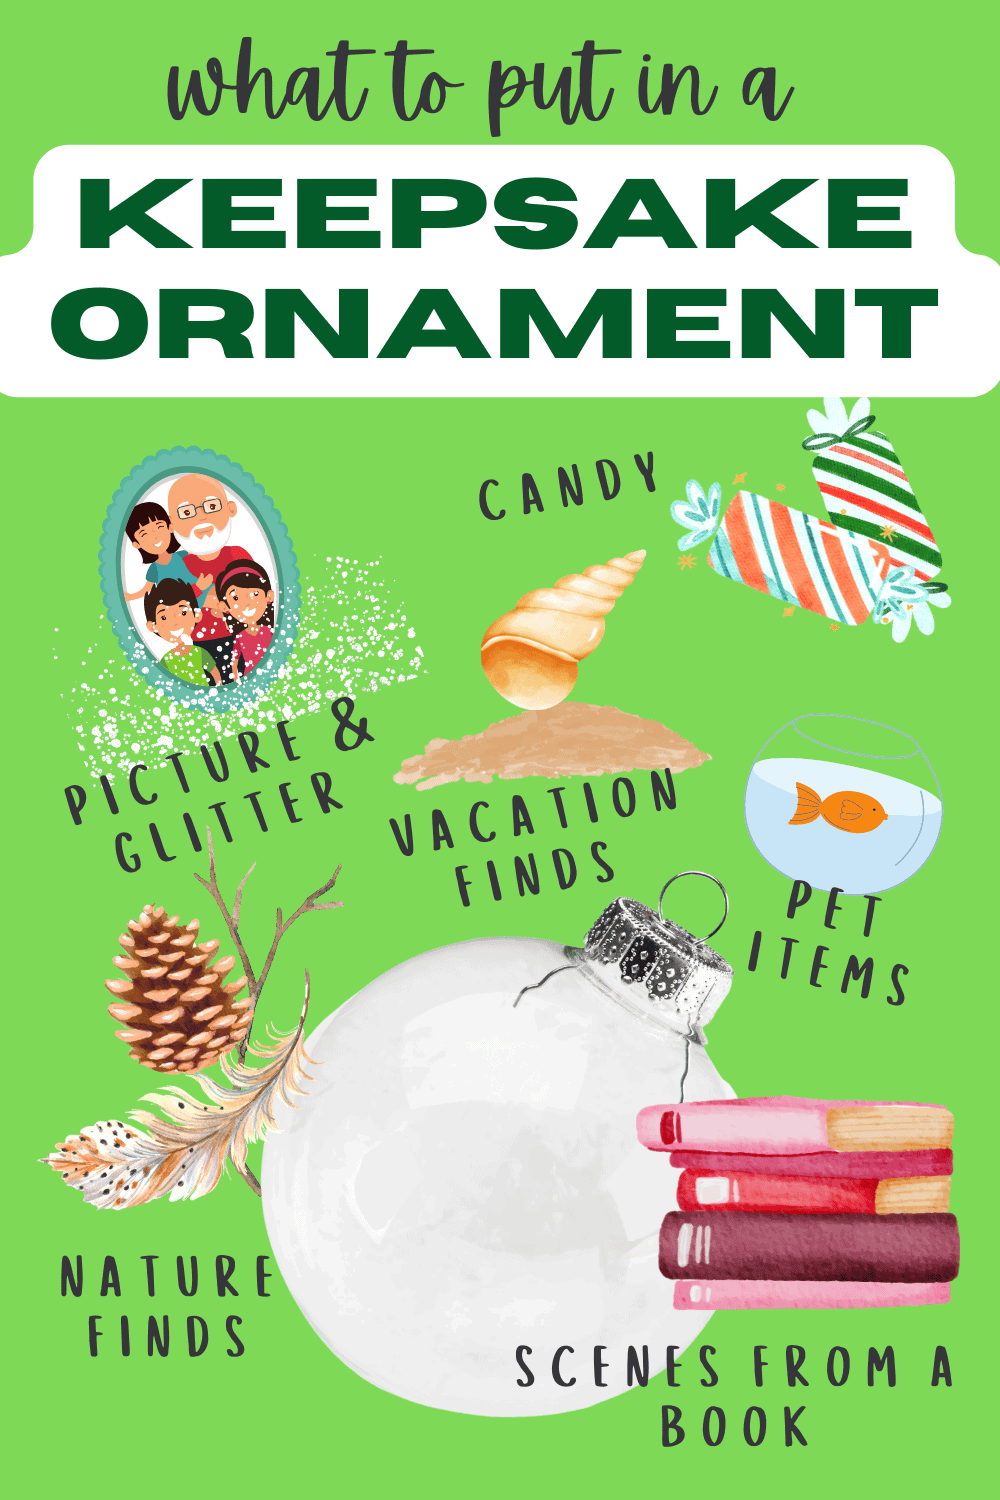 How to make your own ornaments (DIY ornaments with pictures and DIY Christmas Ornaments Ideas) - fun keepsake craft for kids!